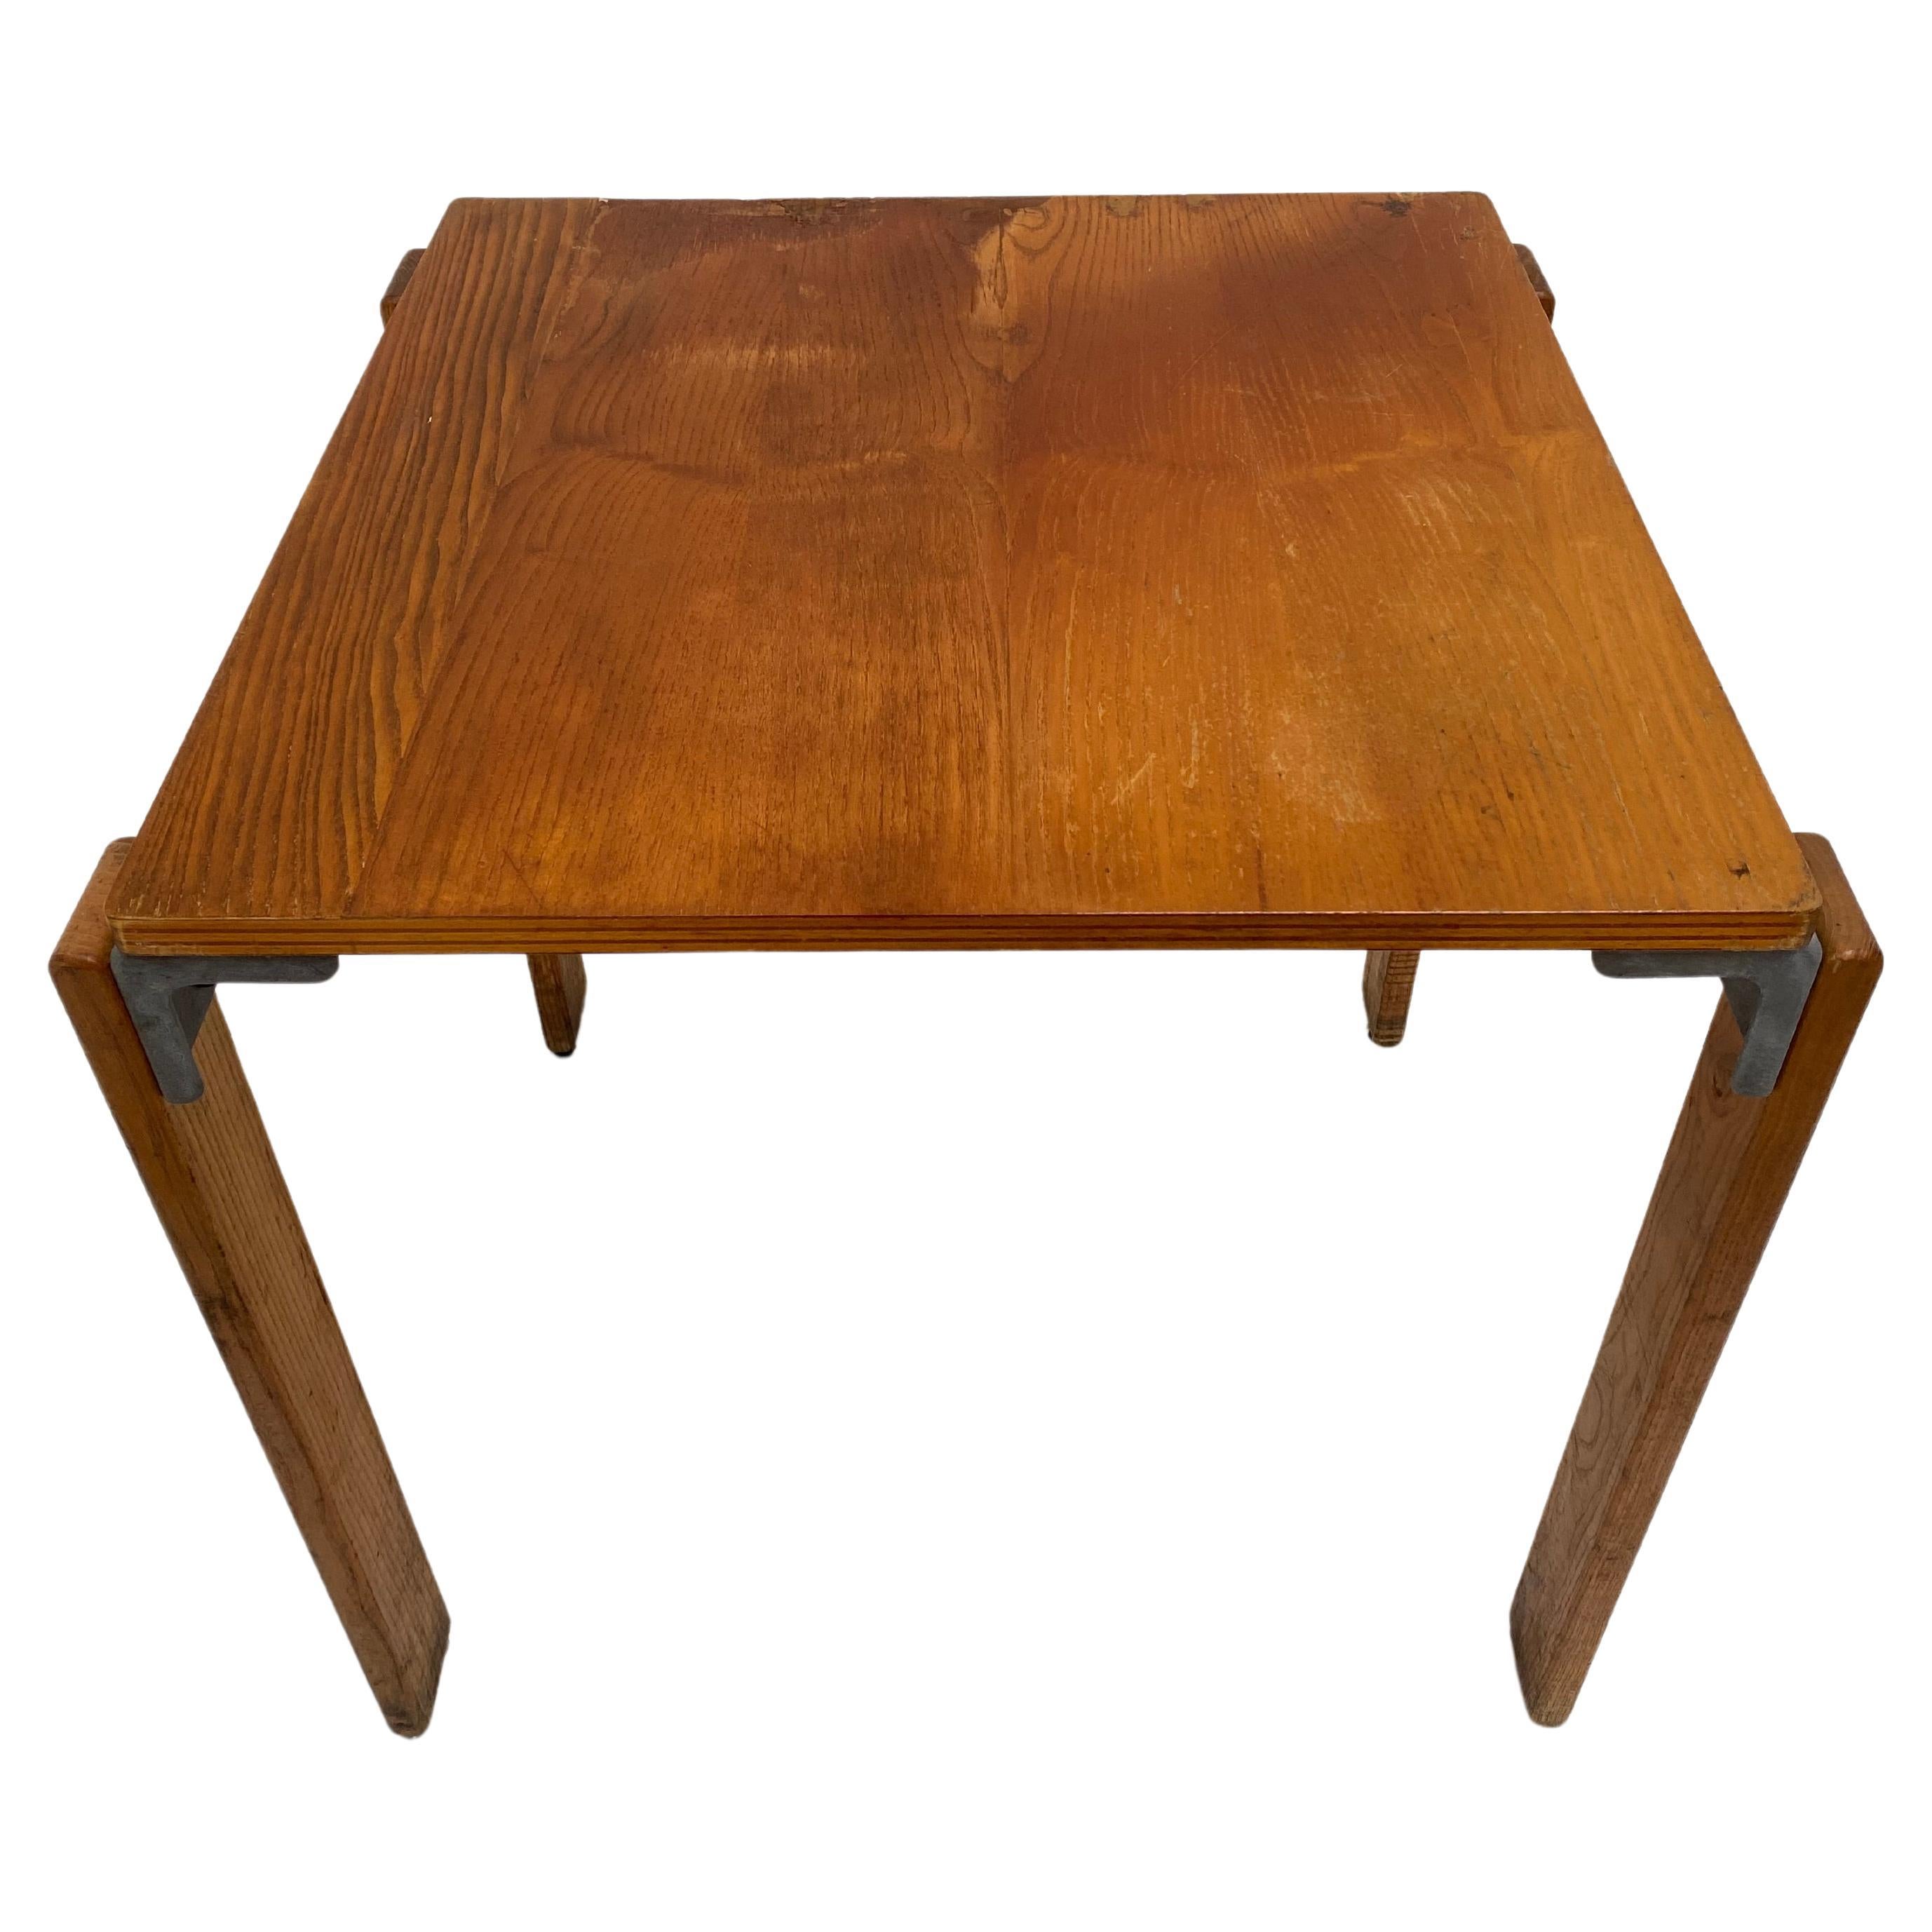 Very Rare George Candilis Dining Table  'Les Carrots' Port Leucate France 1968 For Sale